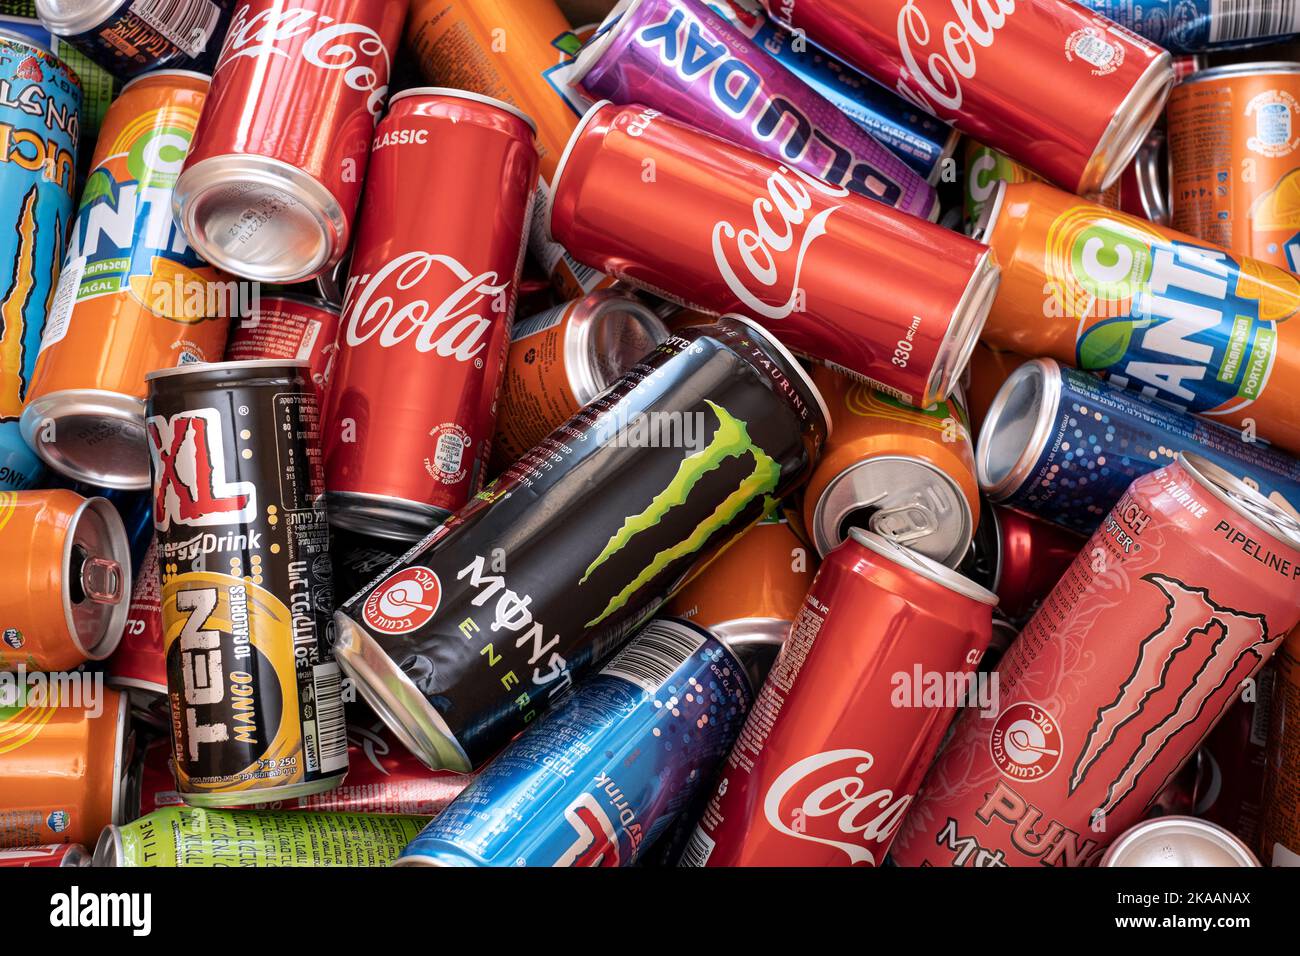 Israel - 31 may 2022: Heap of aluminum cans in trash for recycling waste. Fanta, Coca-Cola, and energetic drinks. Sugar in drink. Editorial Stock Photo